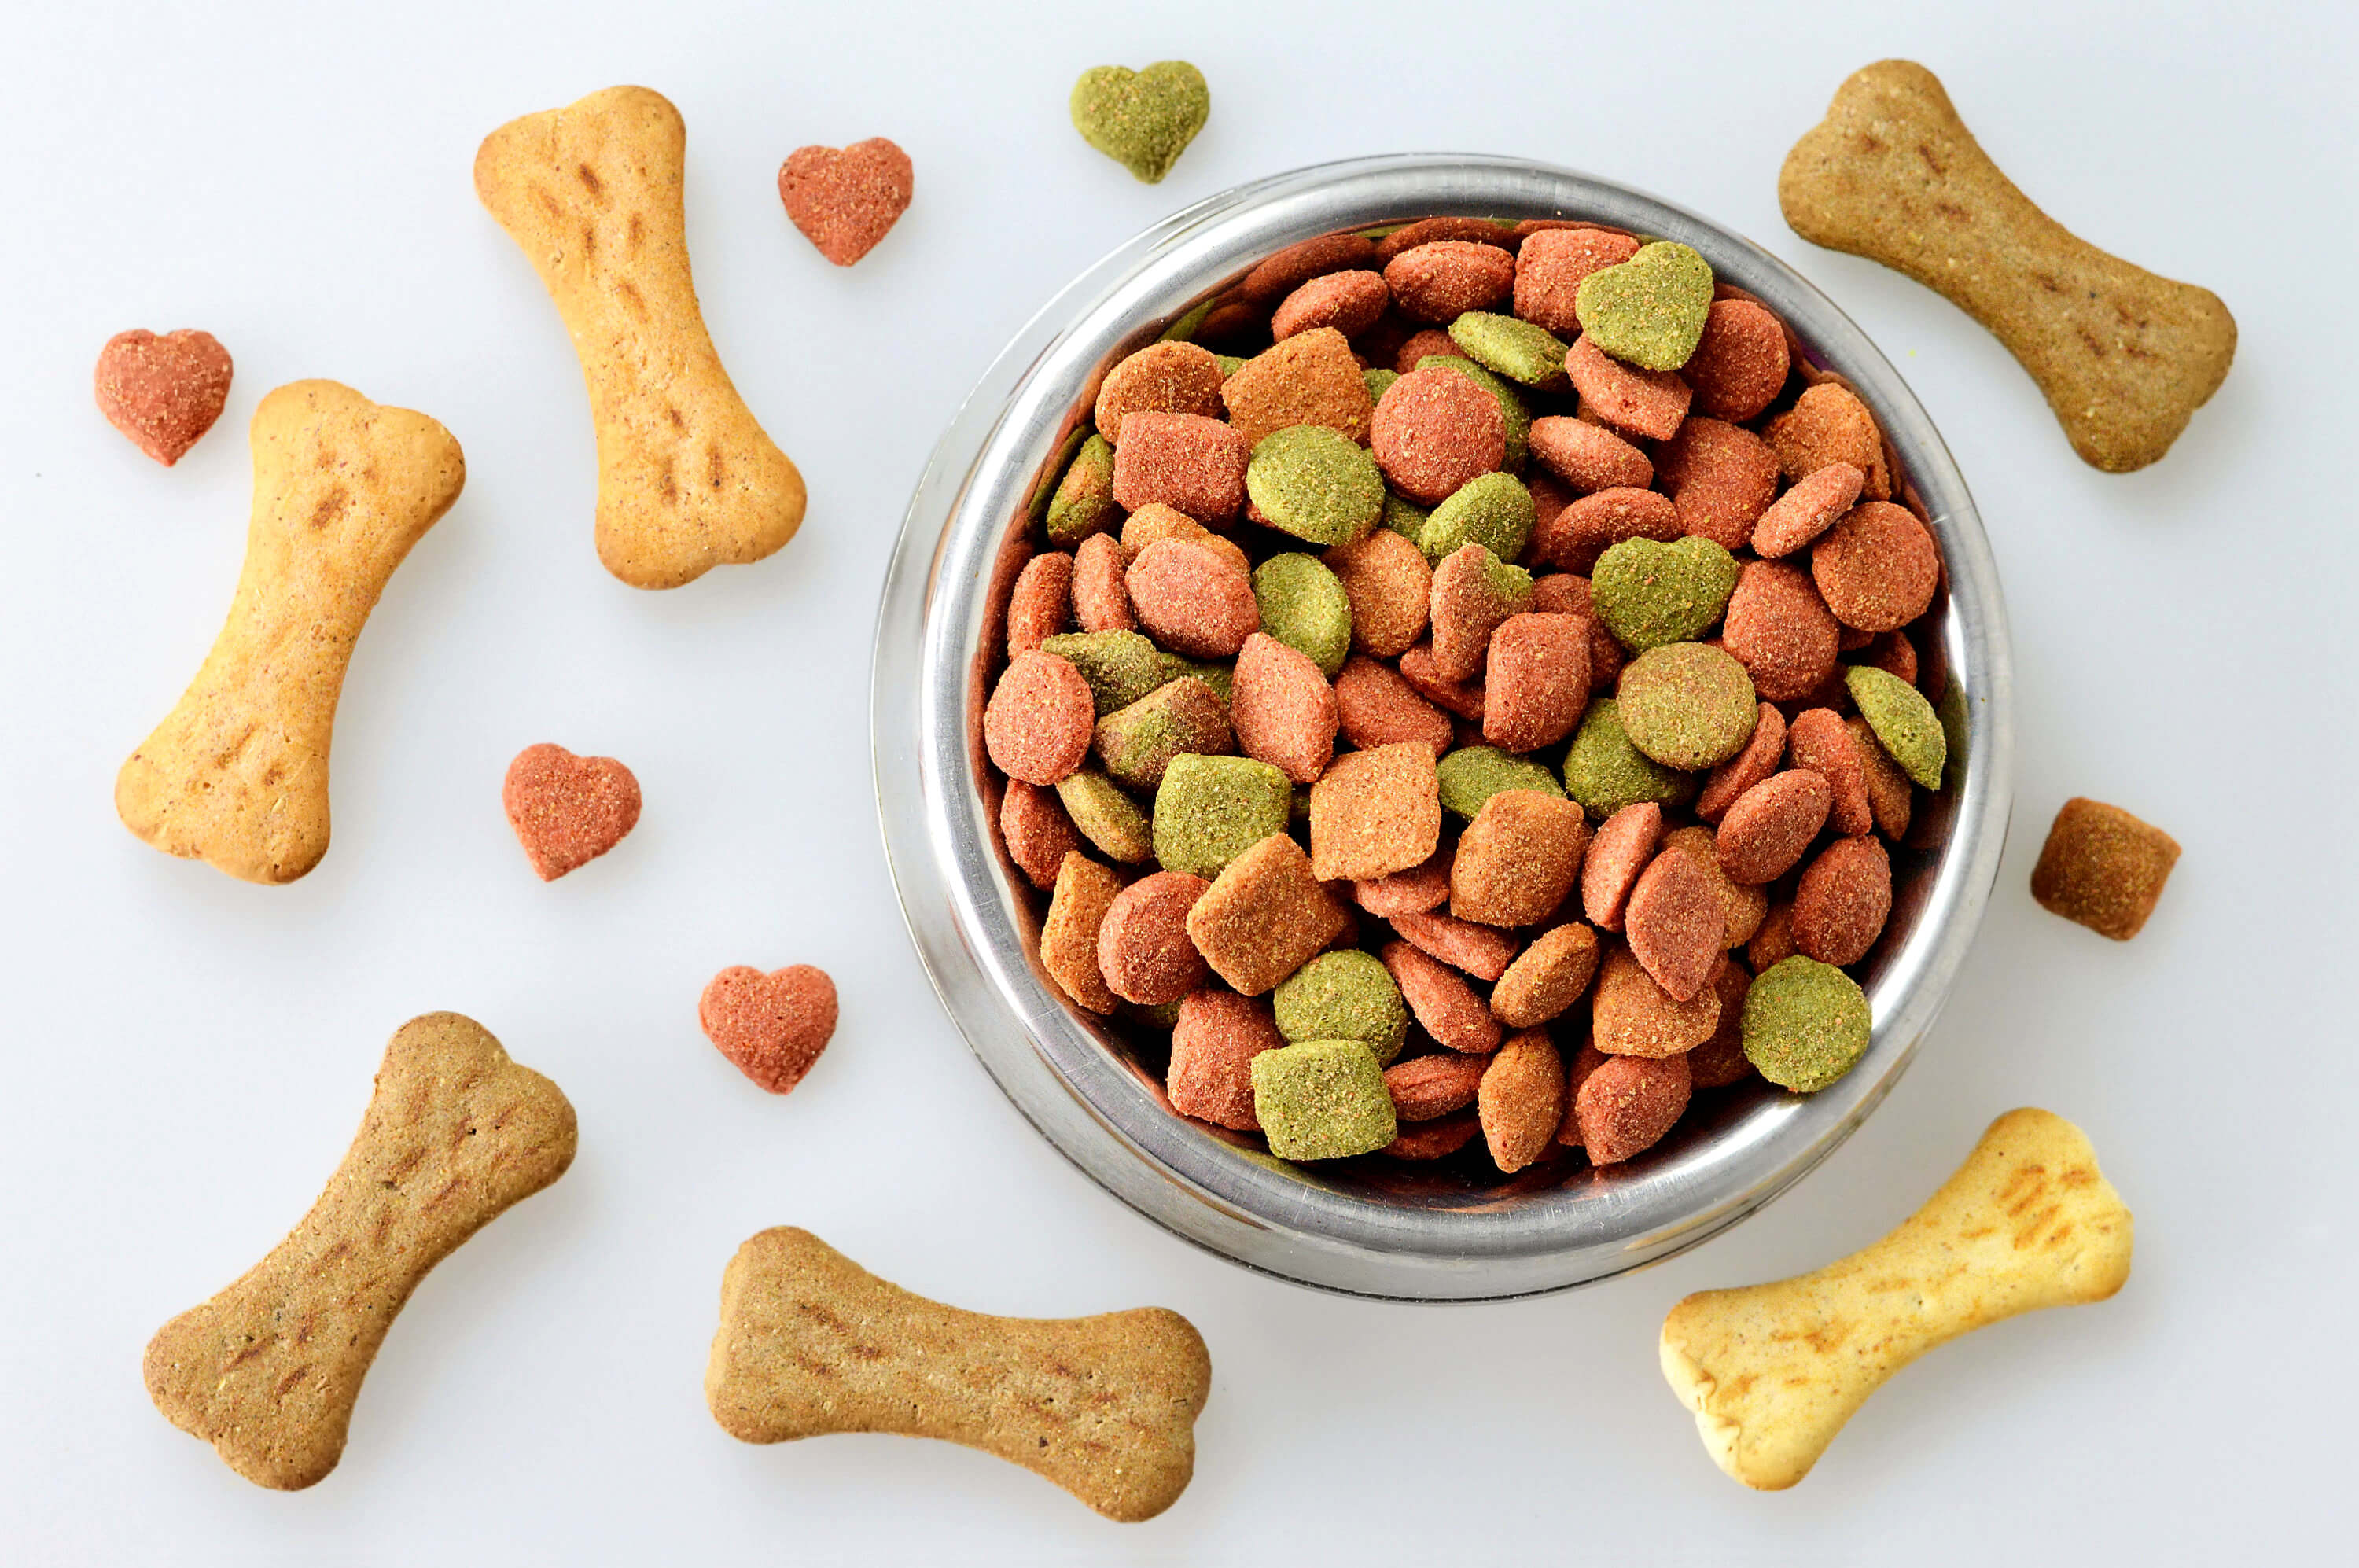 Pet Food Market Size Estimated to Exceed US$ 154.04 Billion Globally By 2027 | CAGR of 5.42%